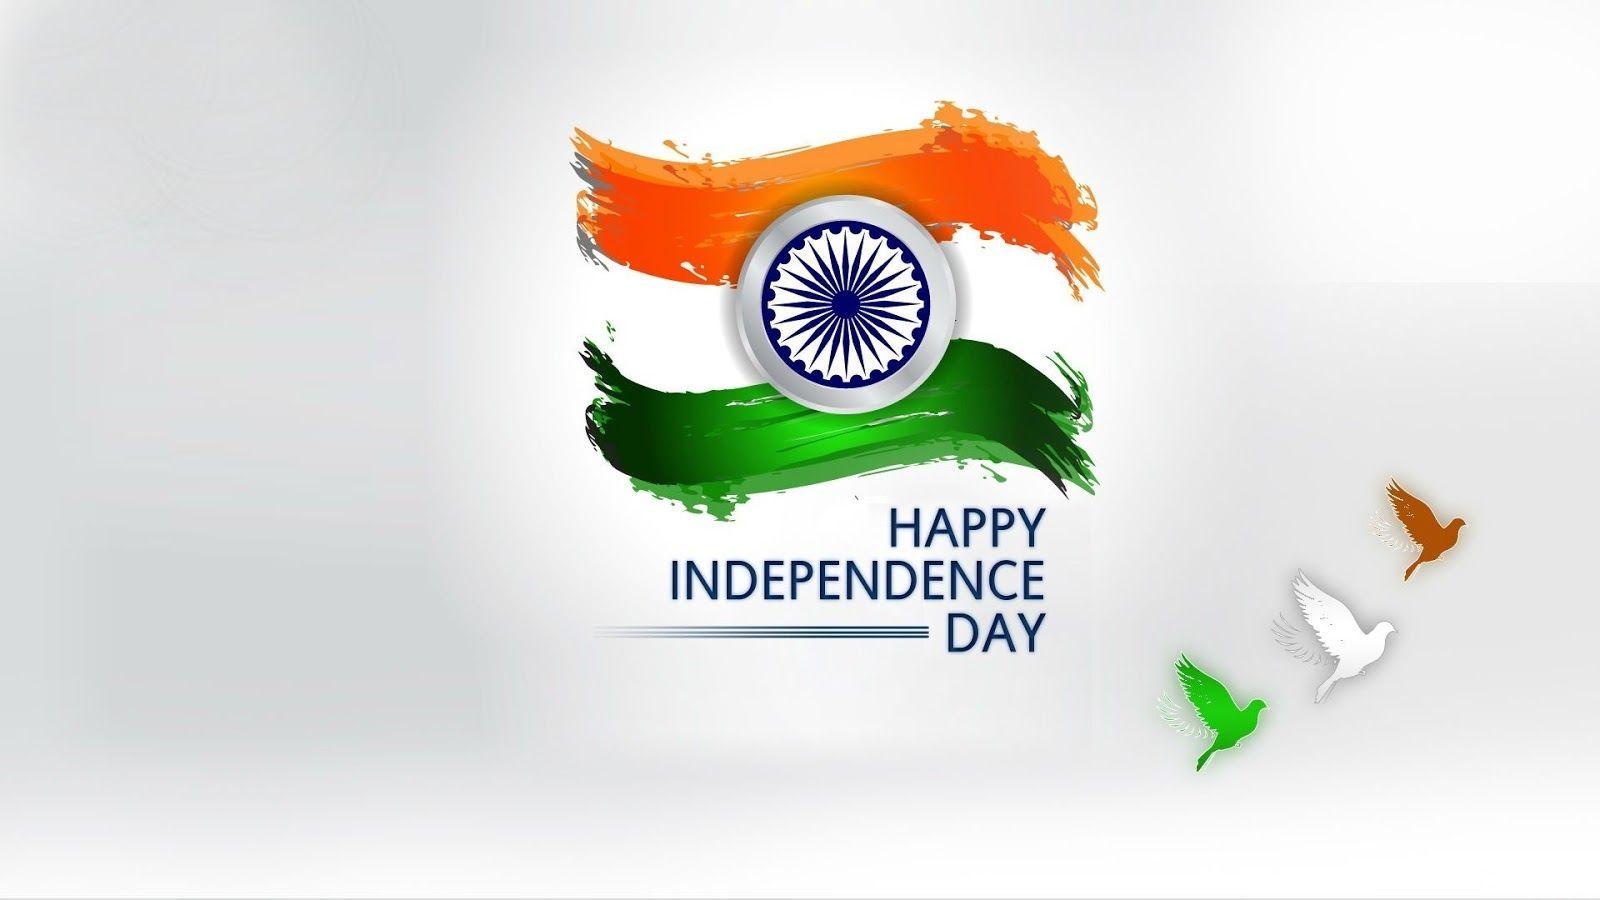 HappY Independence Day Wallpaper 2016 Indian HD Flag Image